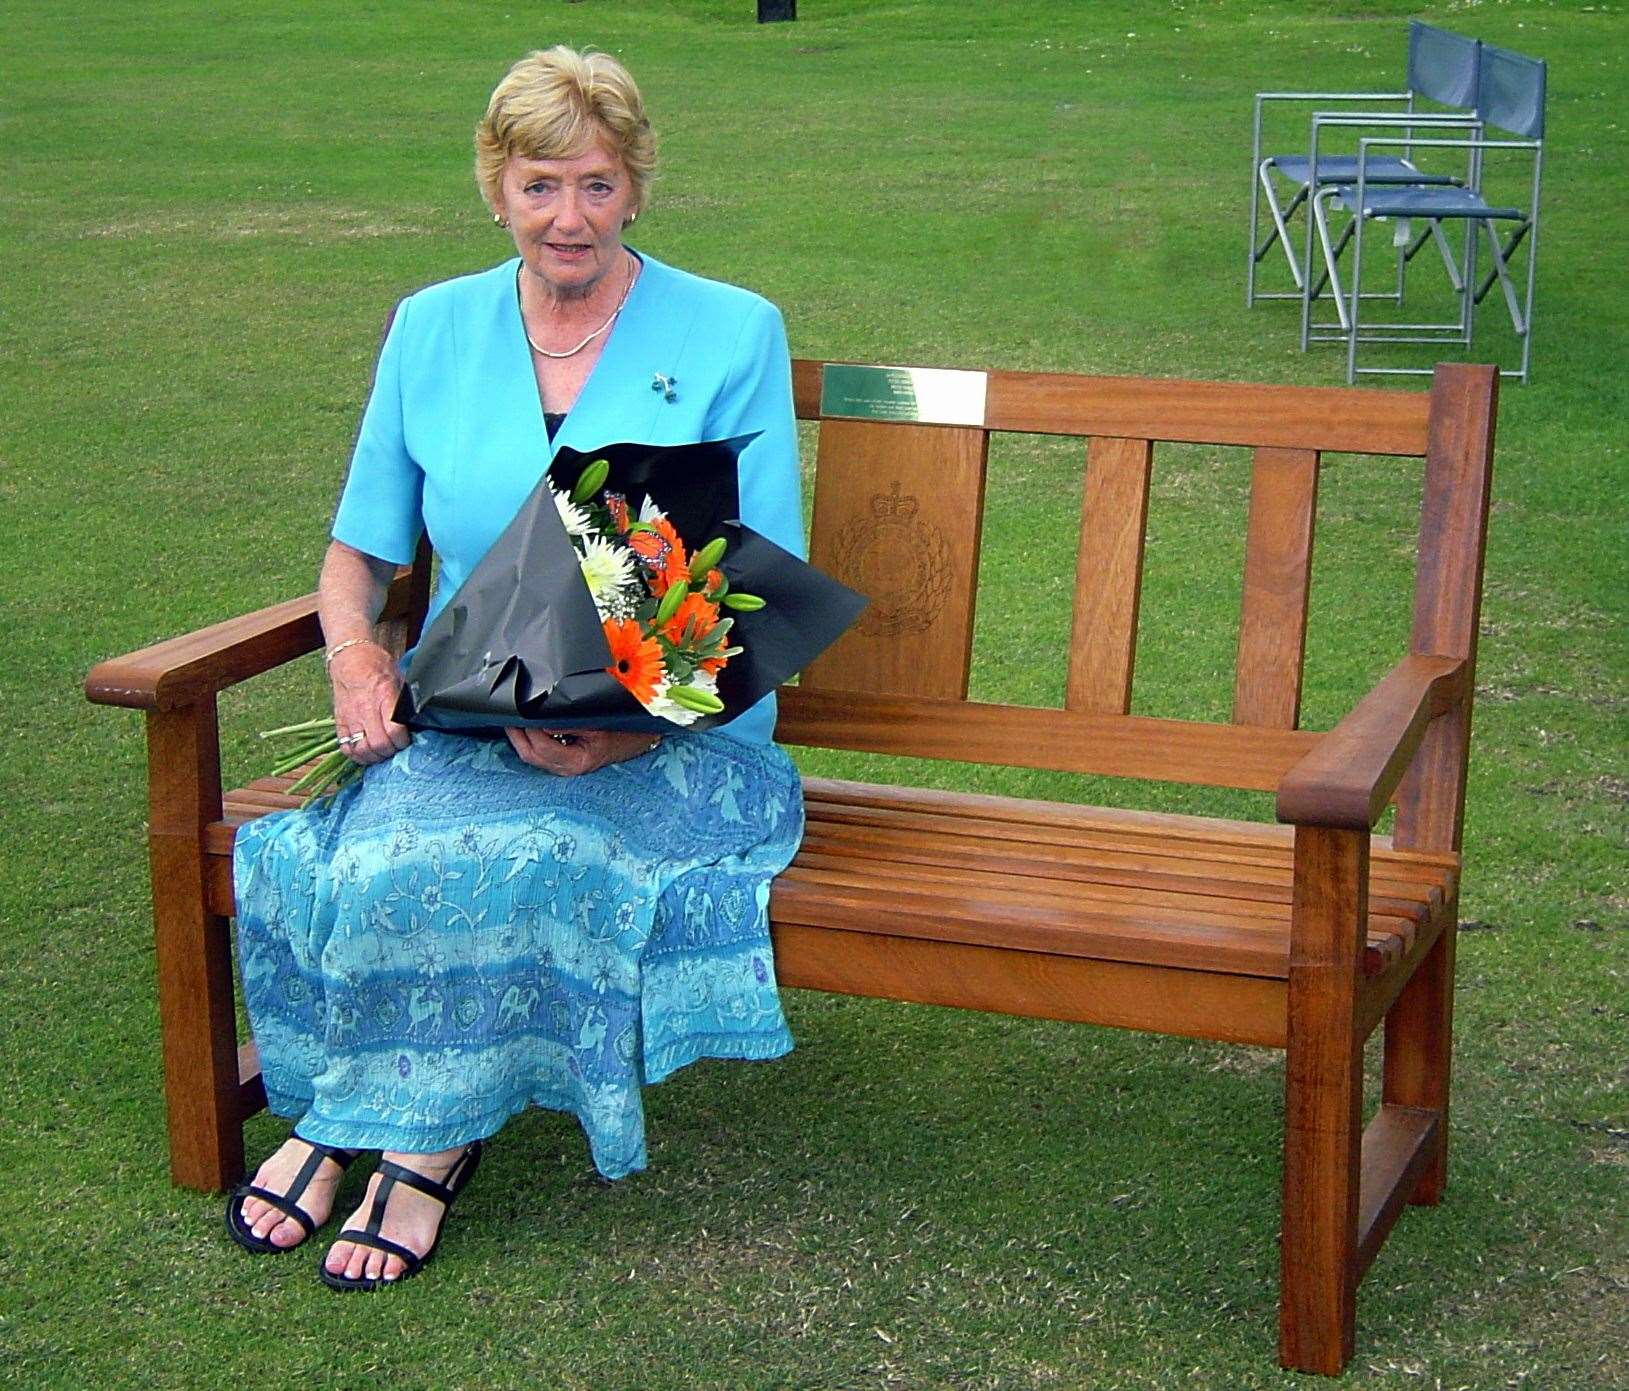 Margaret Ansted, widow of Don, on the bench dedicated in his memory